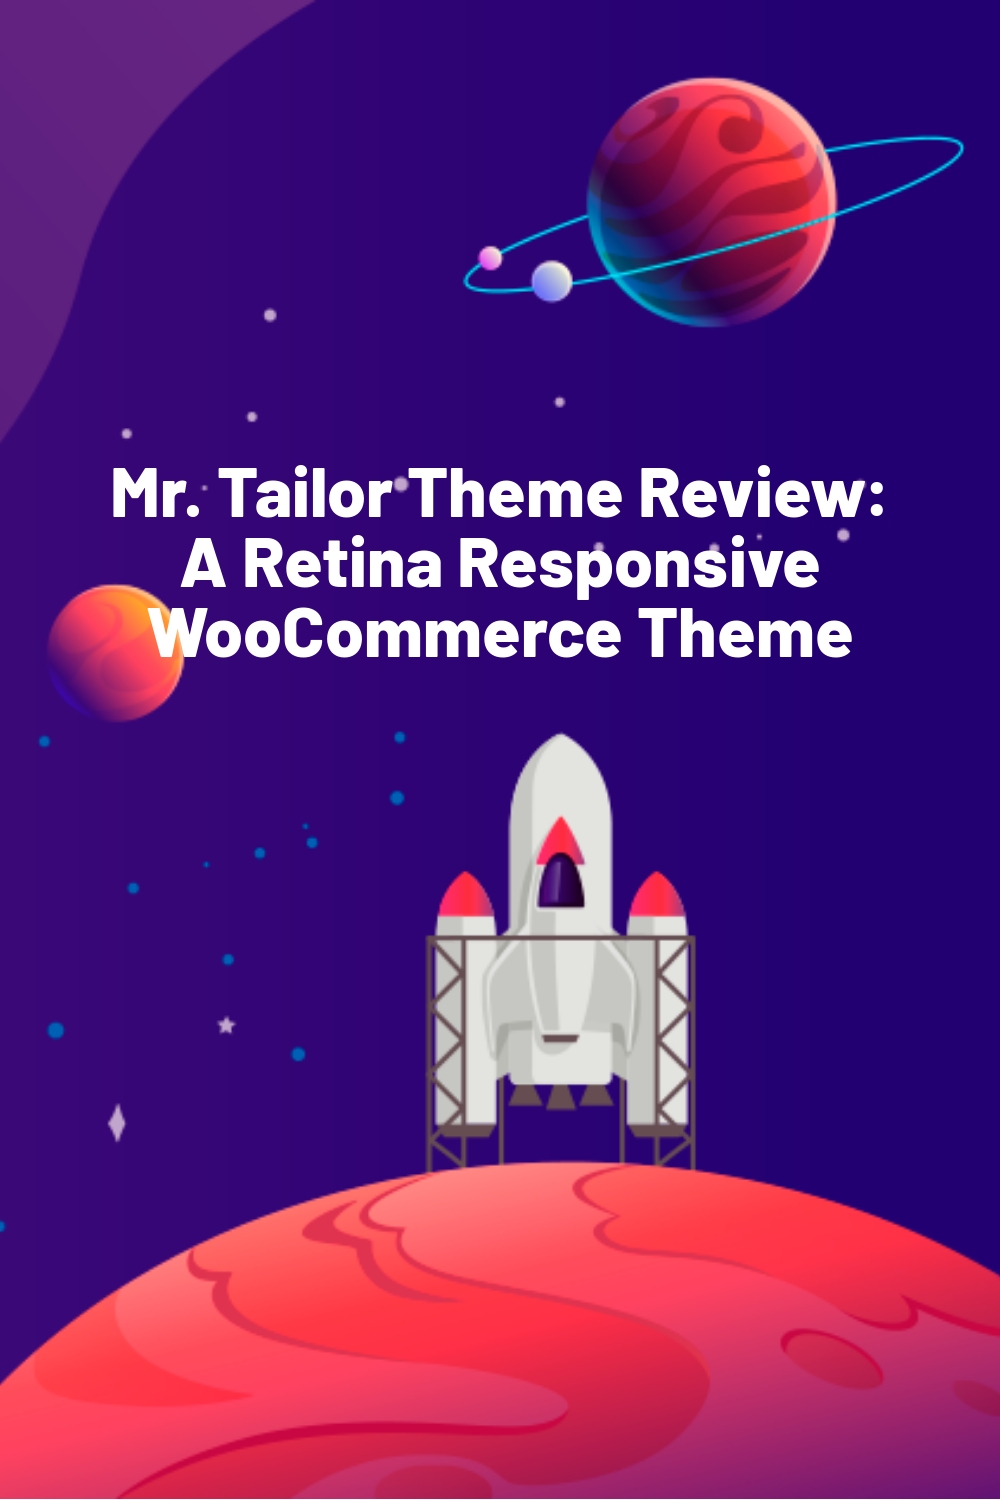 Mr. Tailor Theme Review: A Retina Responsive WooCommerce Theme